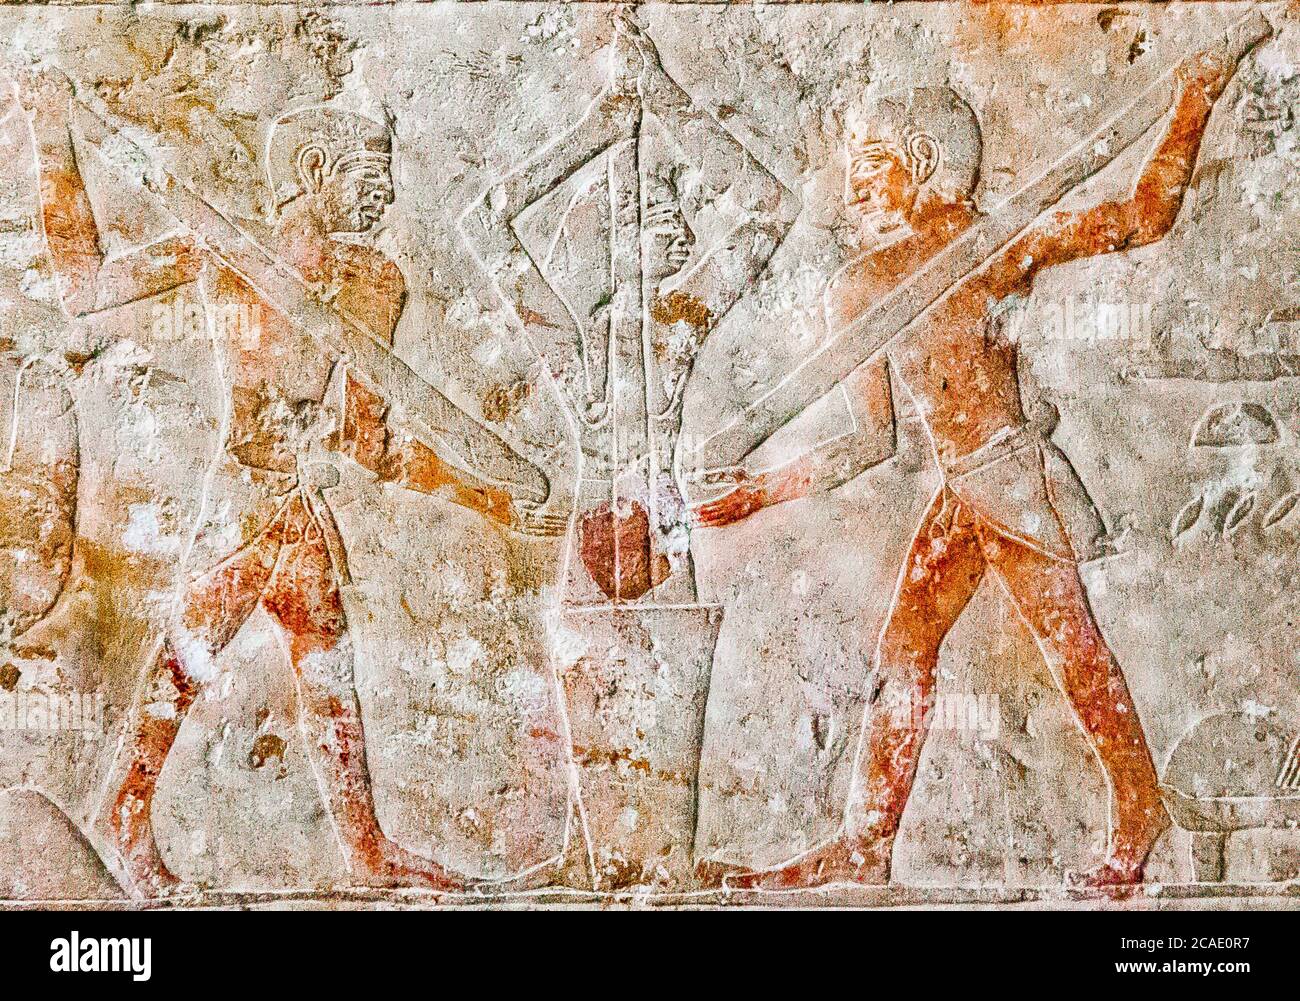 Egypt, Cairo, Egyptian Museum, from the tomb of Kaemrehu, Saqqara, detail of a big relief depicting agricultural scenes : Grinding grain. Stock Photo